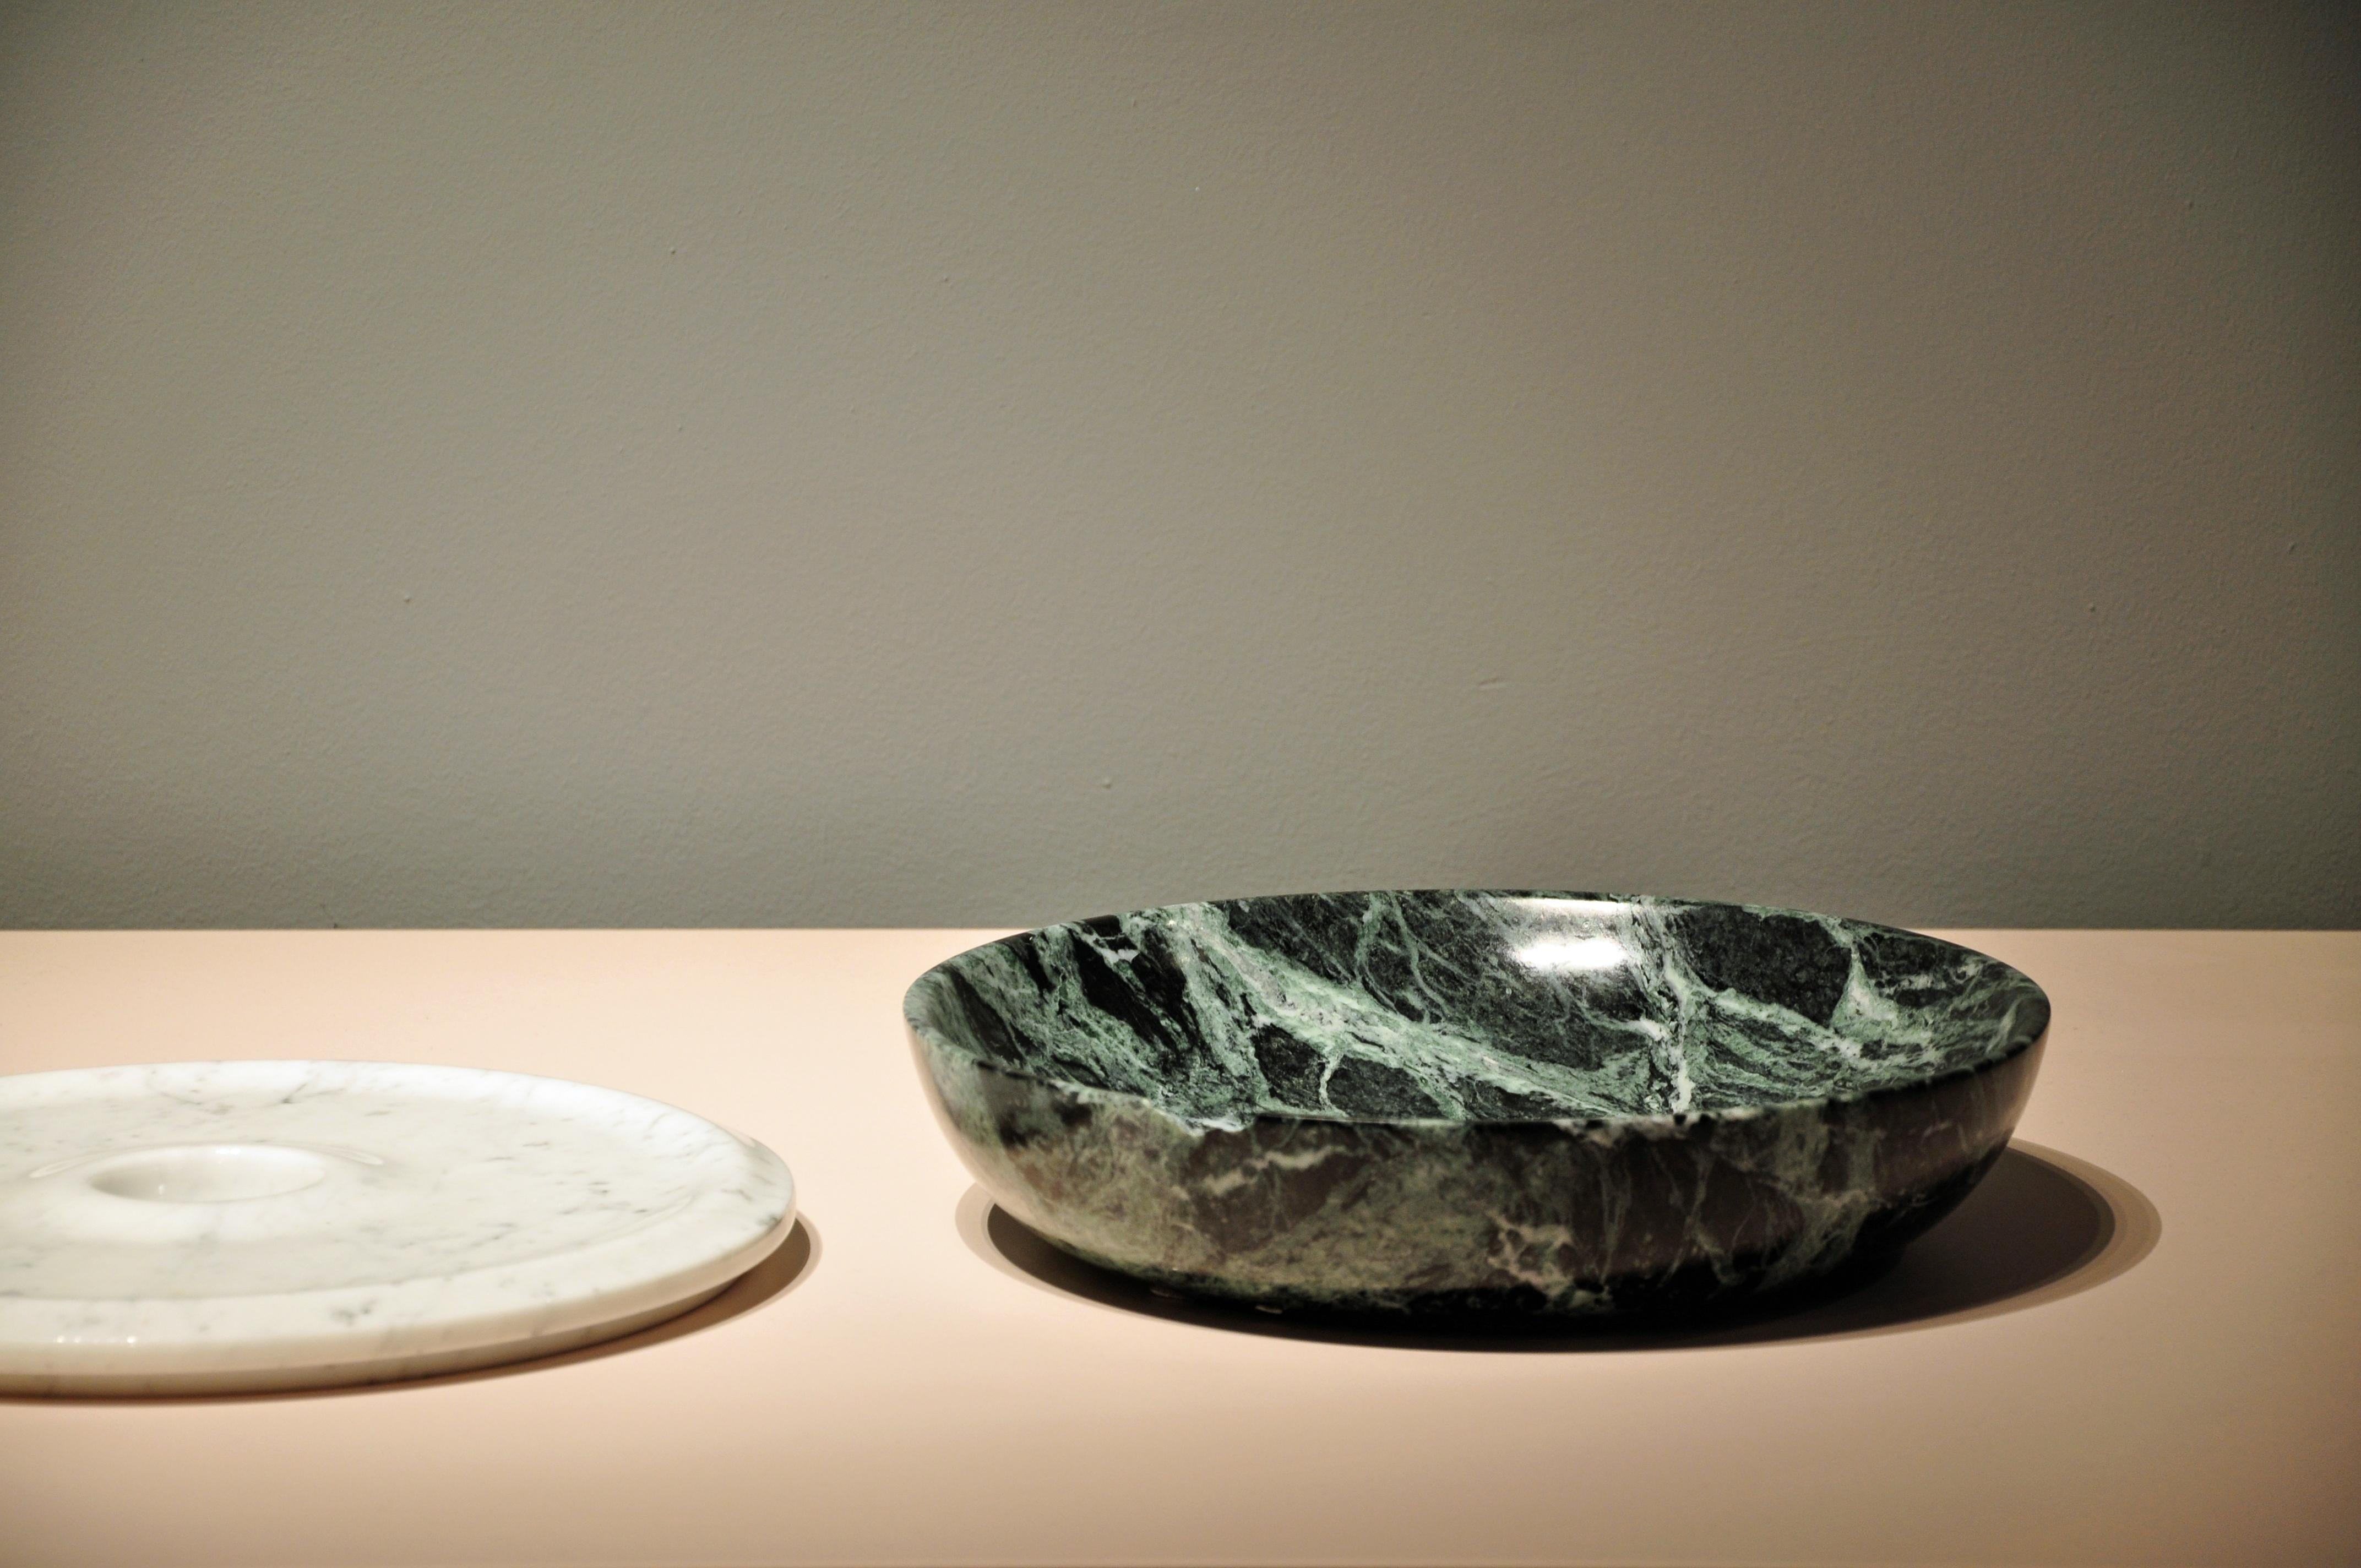 European Bowl and Candleholder Made of Carrara Marble by Designer Torsten Neuland, 2014 For Sale